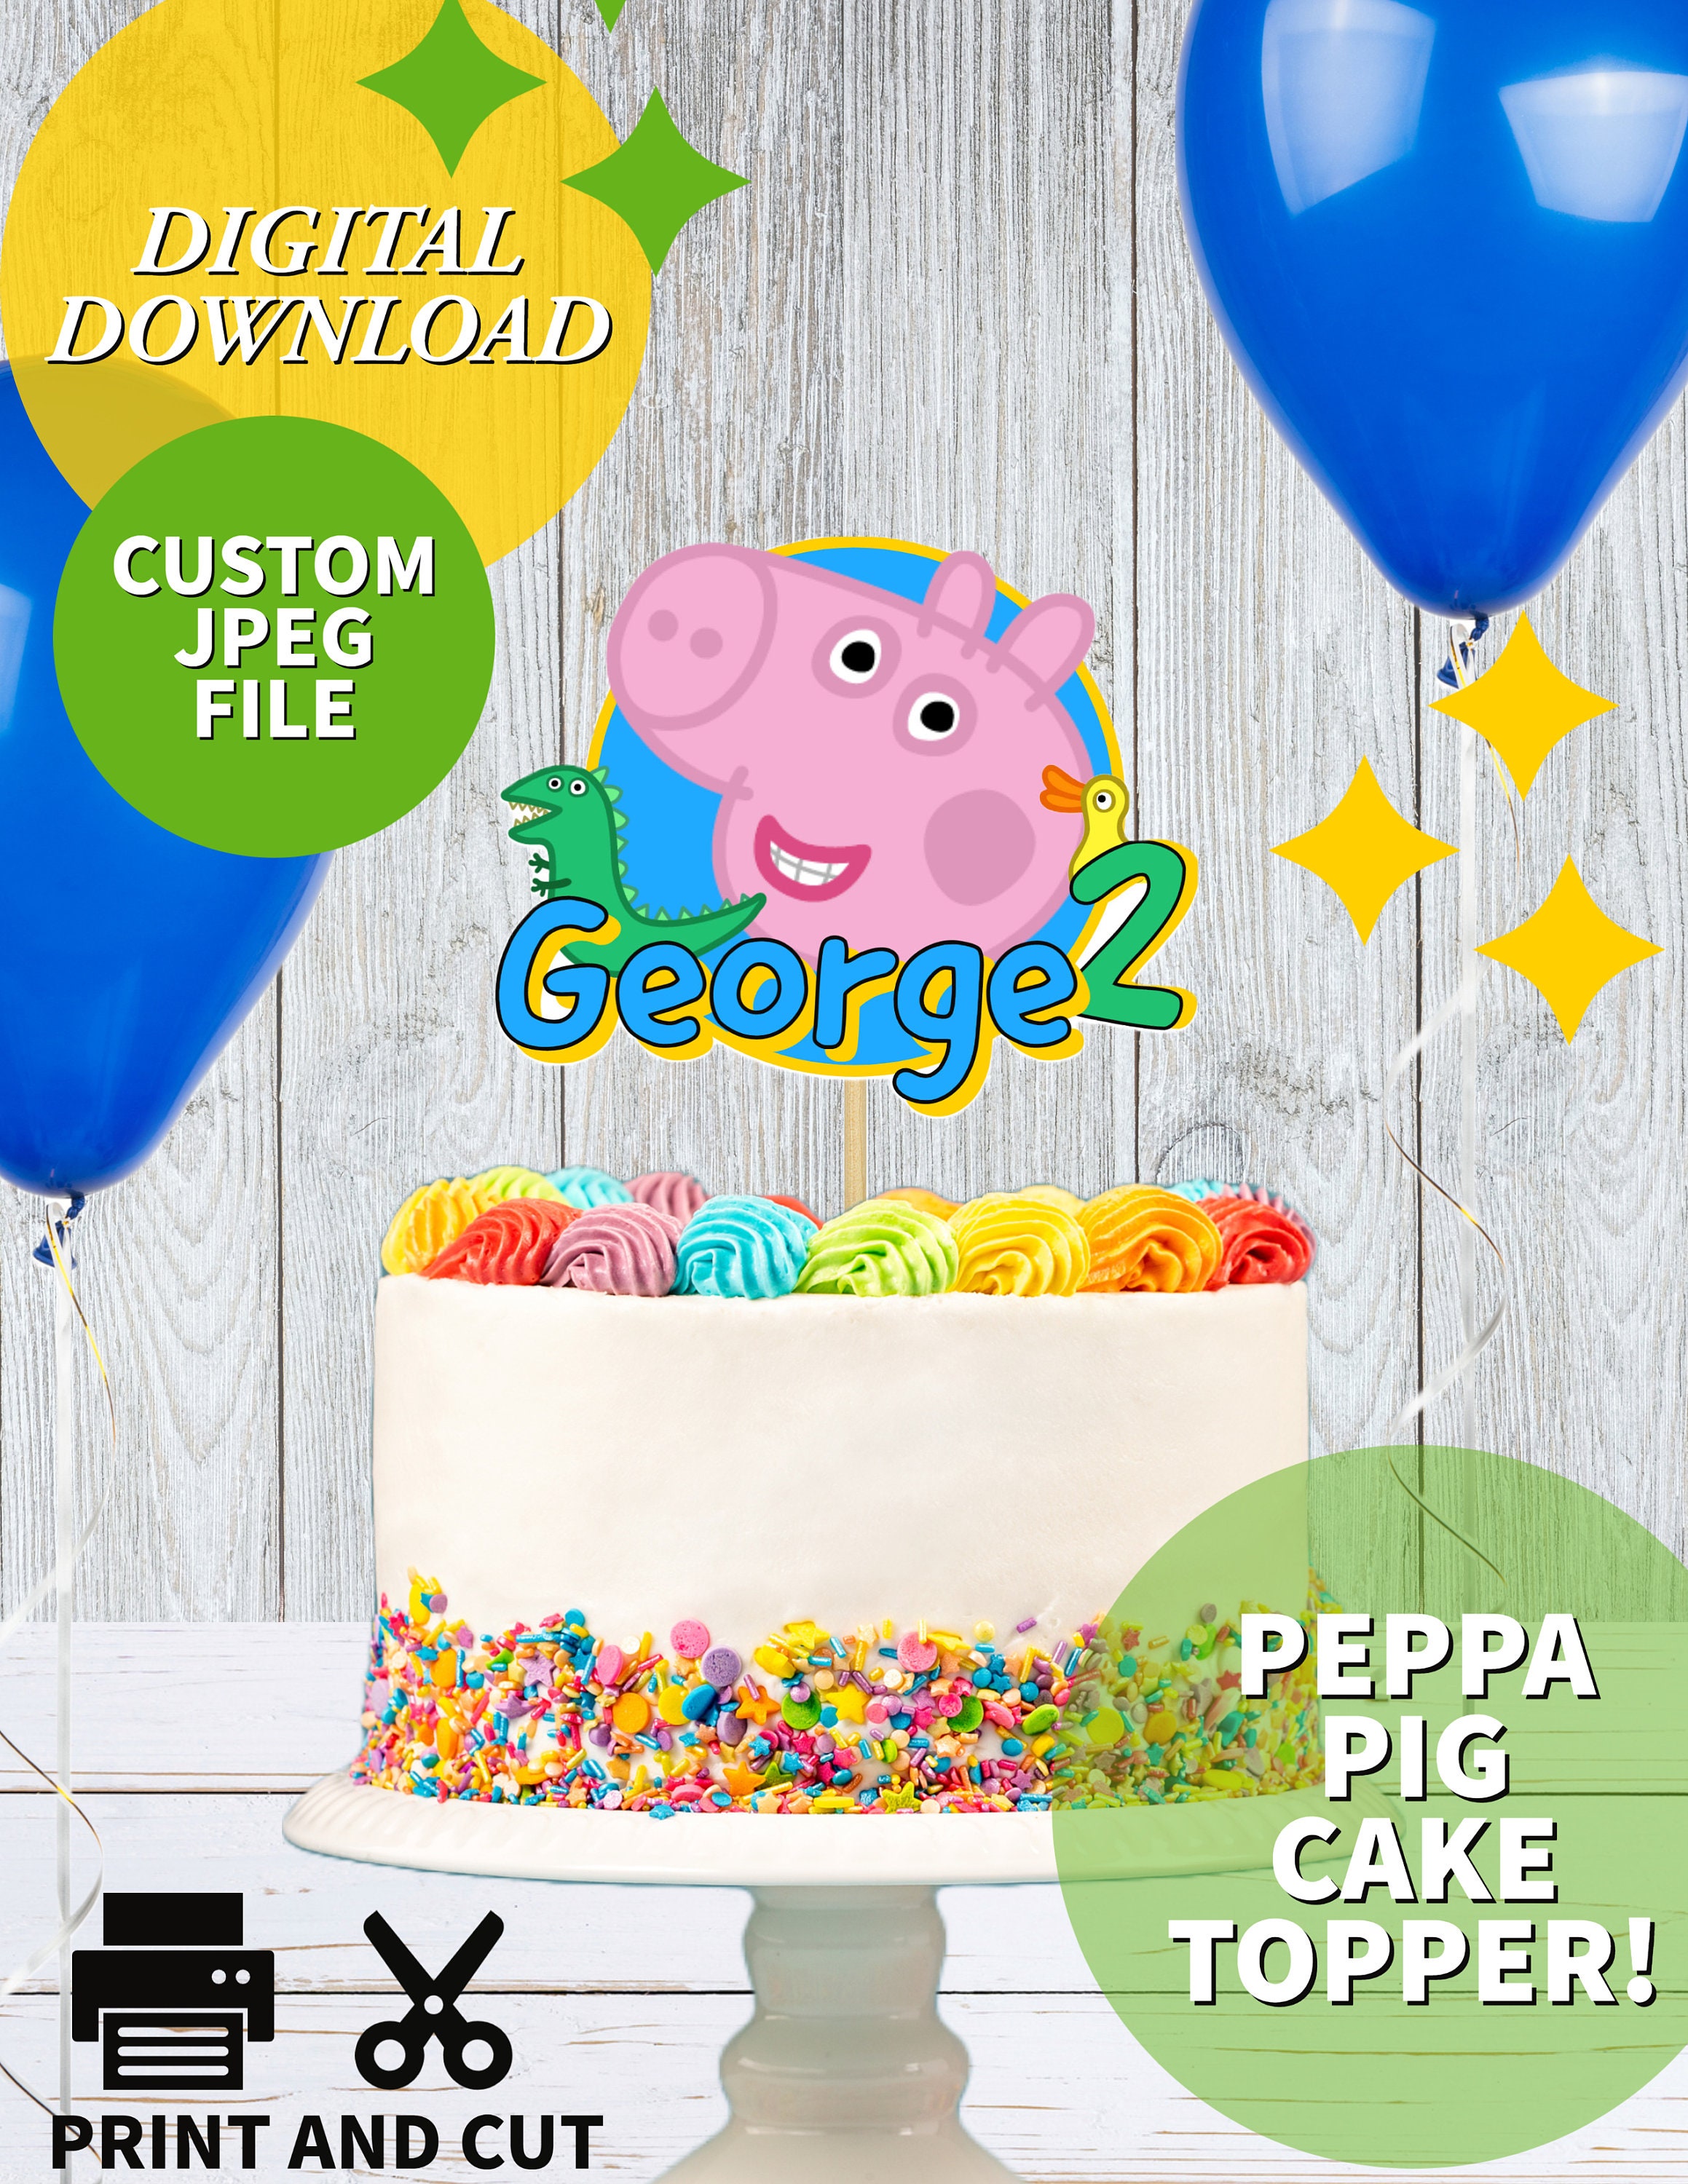 Peppa Pig Pig edible cake topper new birthday party decoration gift new  picture